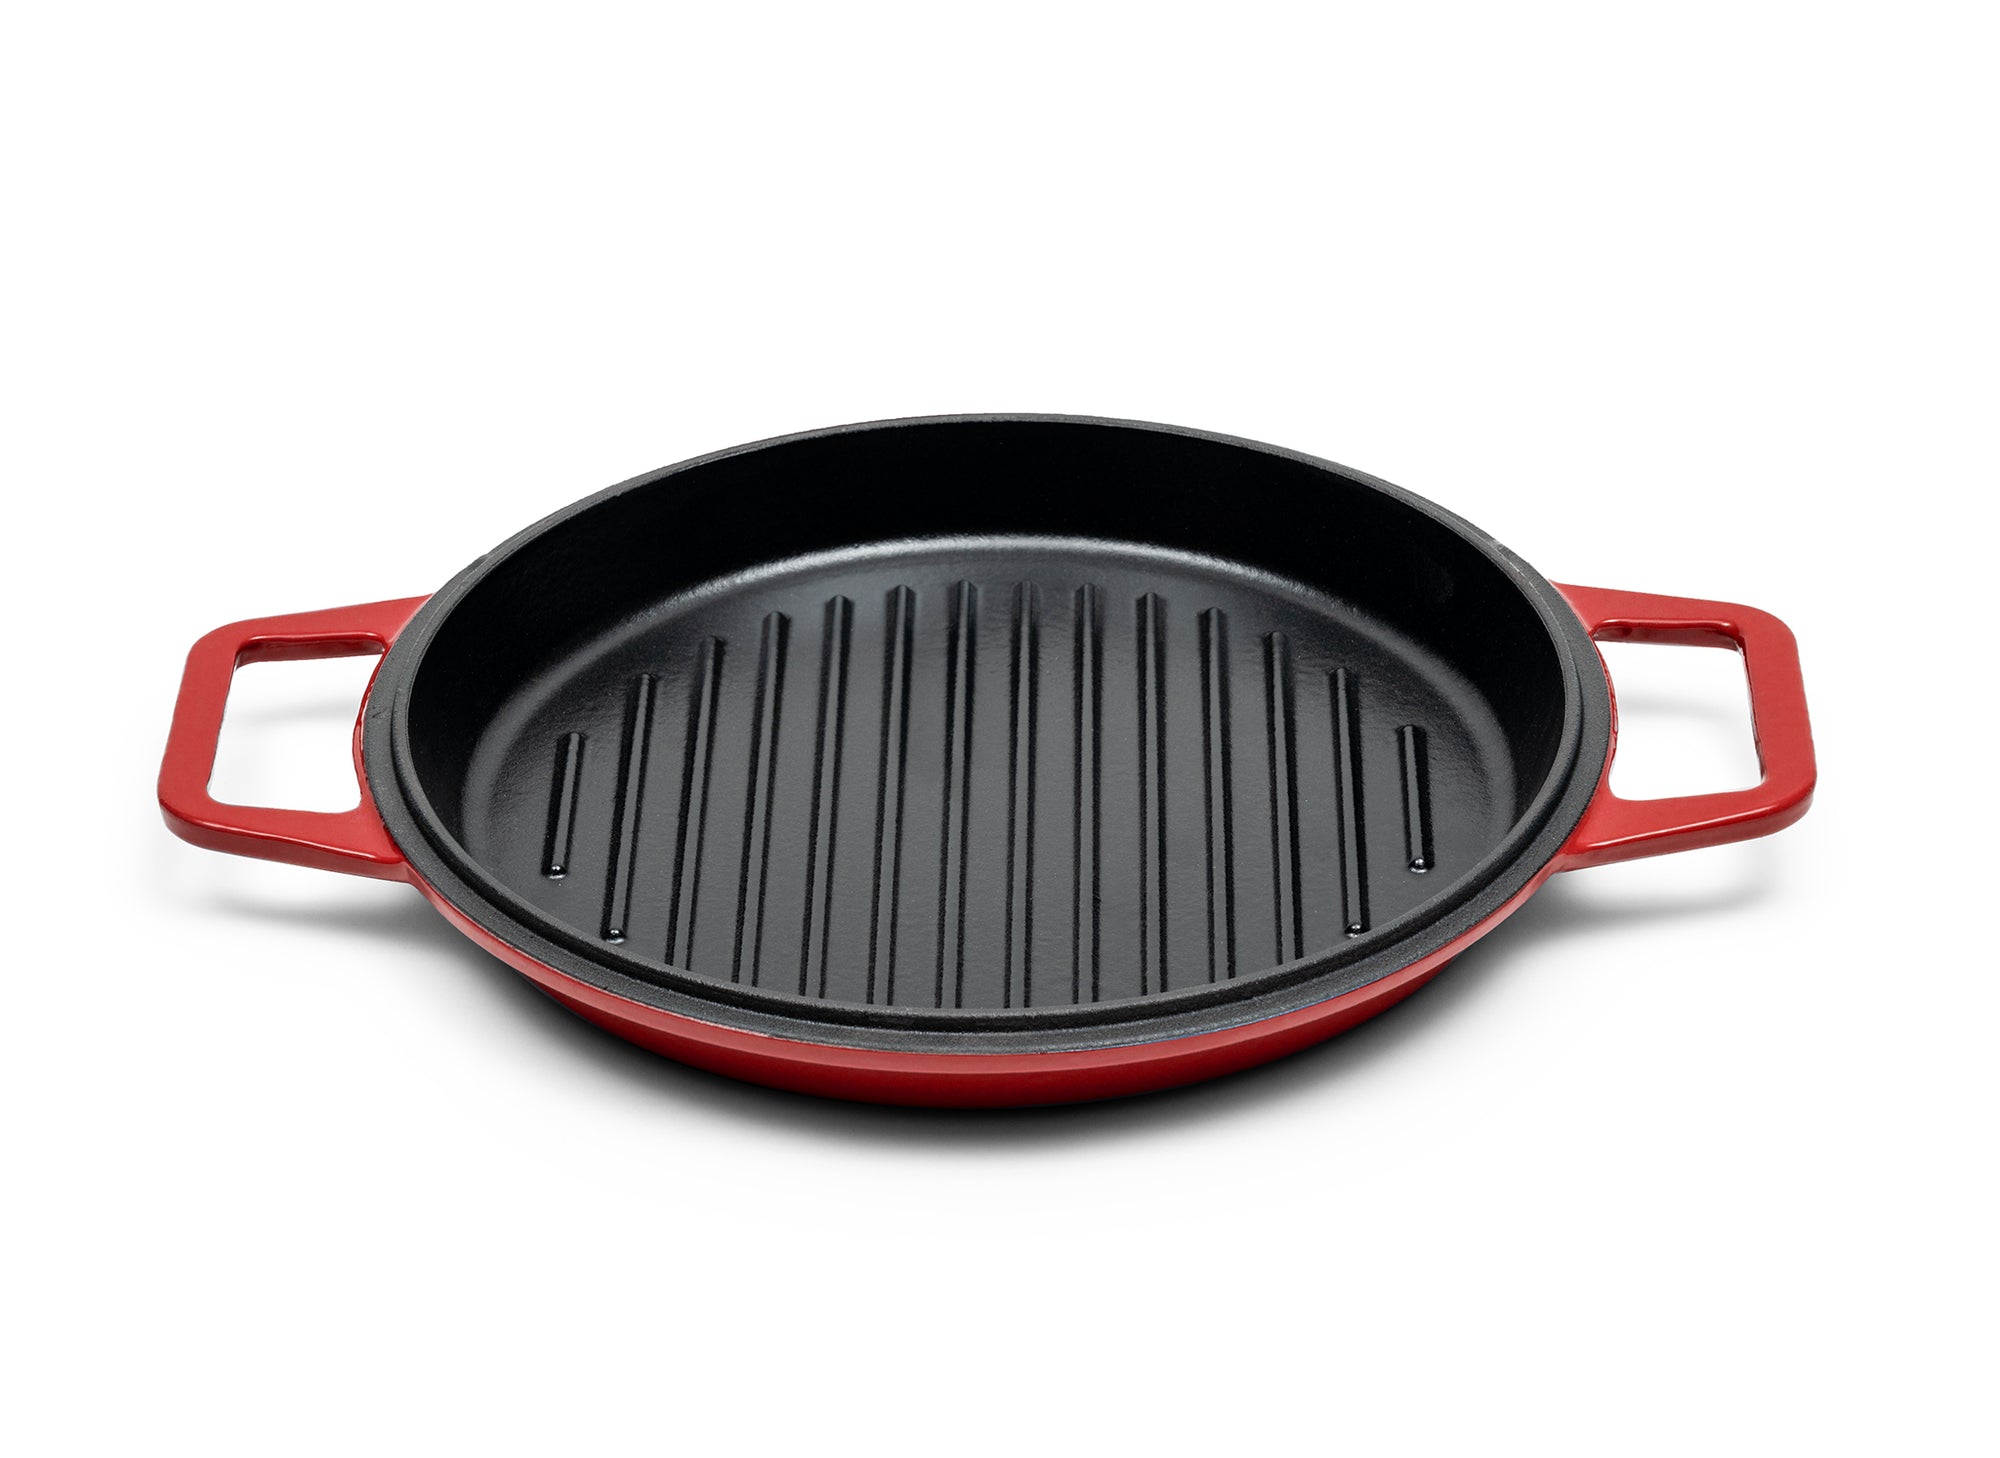 Red Grill Lid for 7-quart Dutch oven face up on white background, showing black enamel interior with raised grill lines.